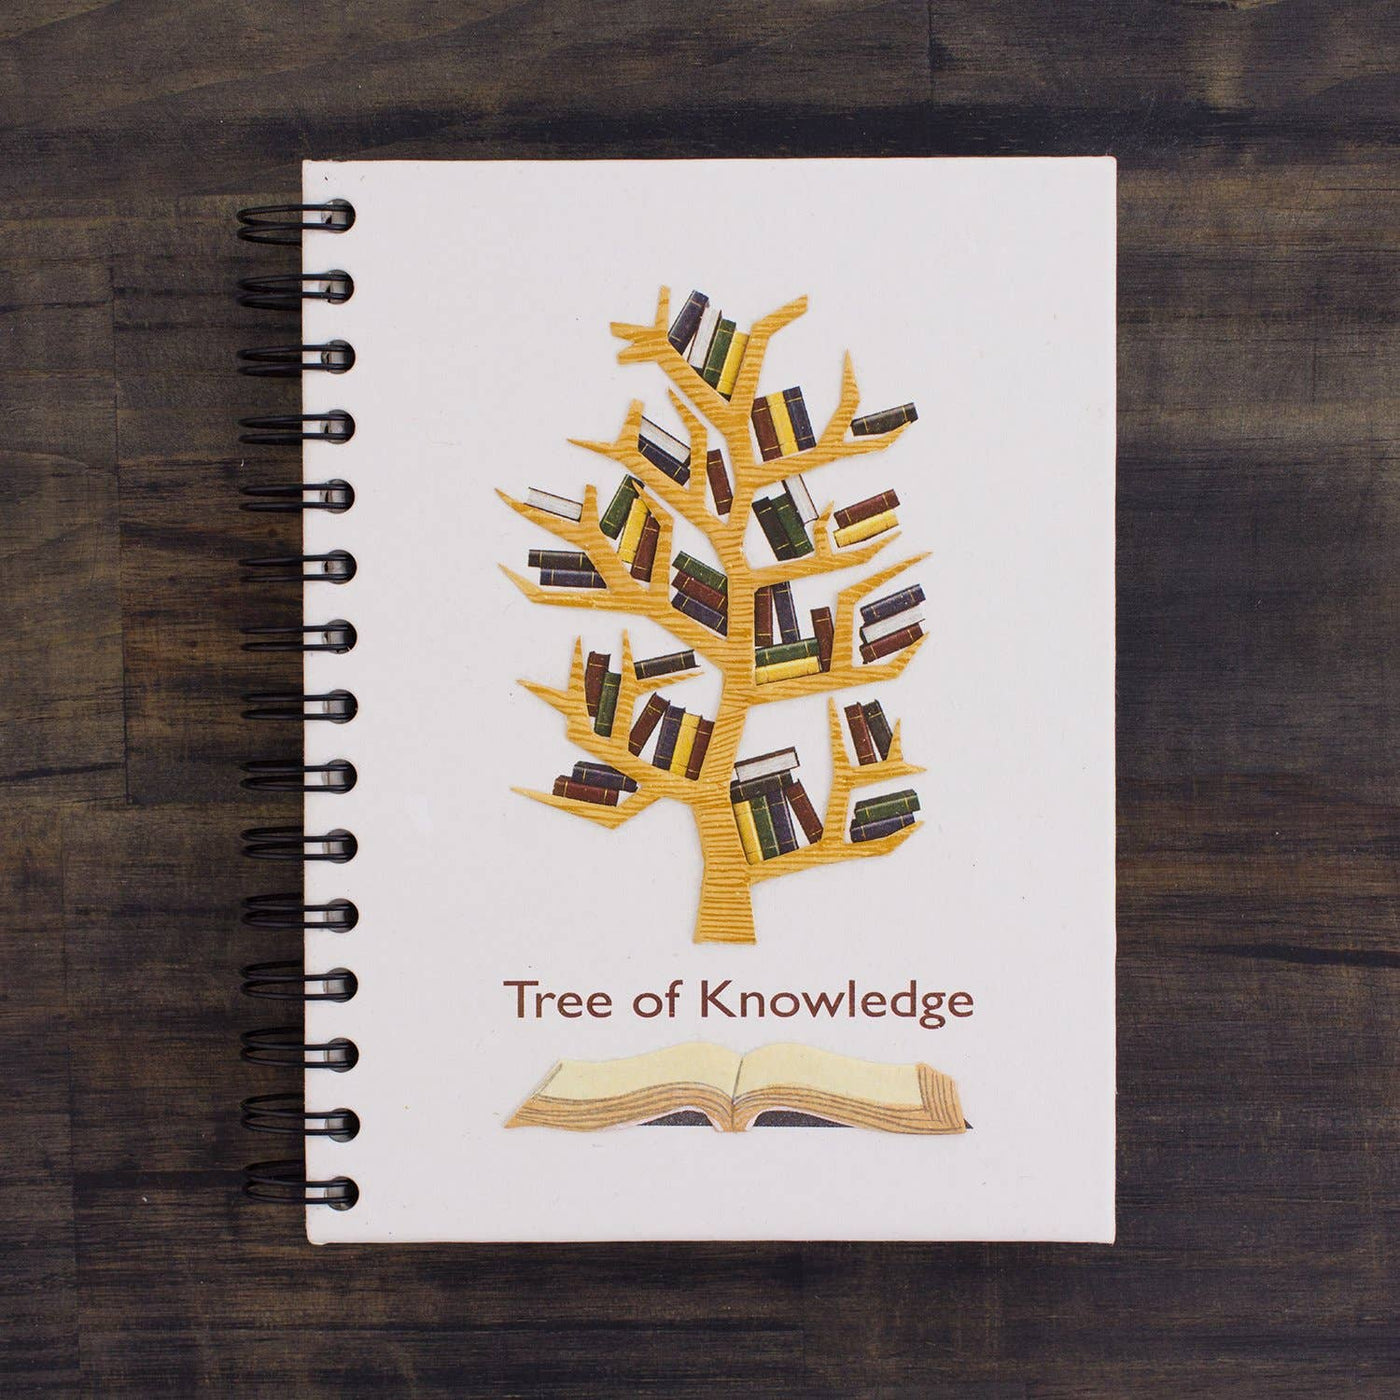 Large Notebook Tree of Knowledge